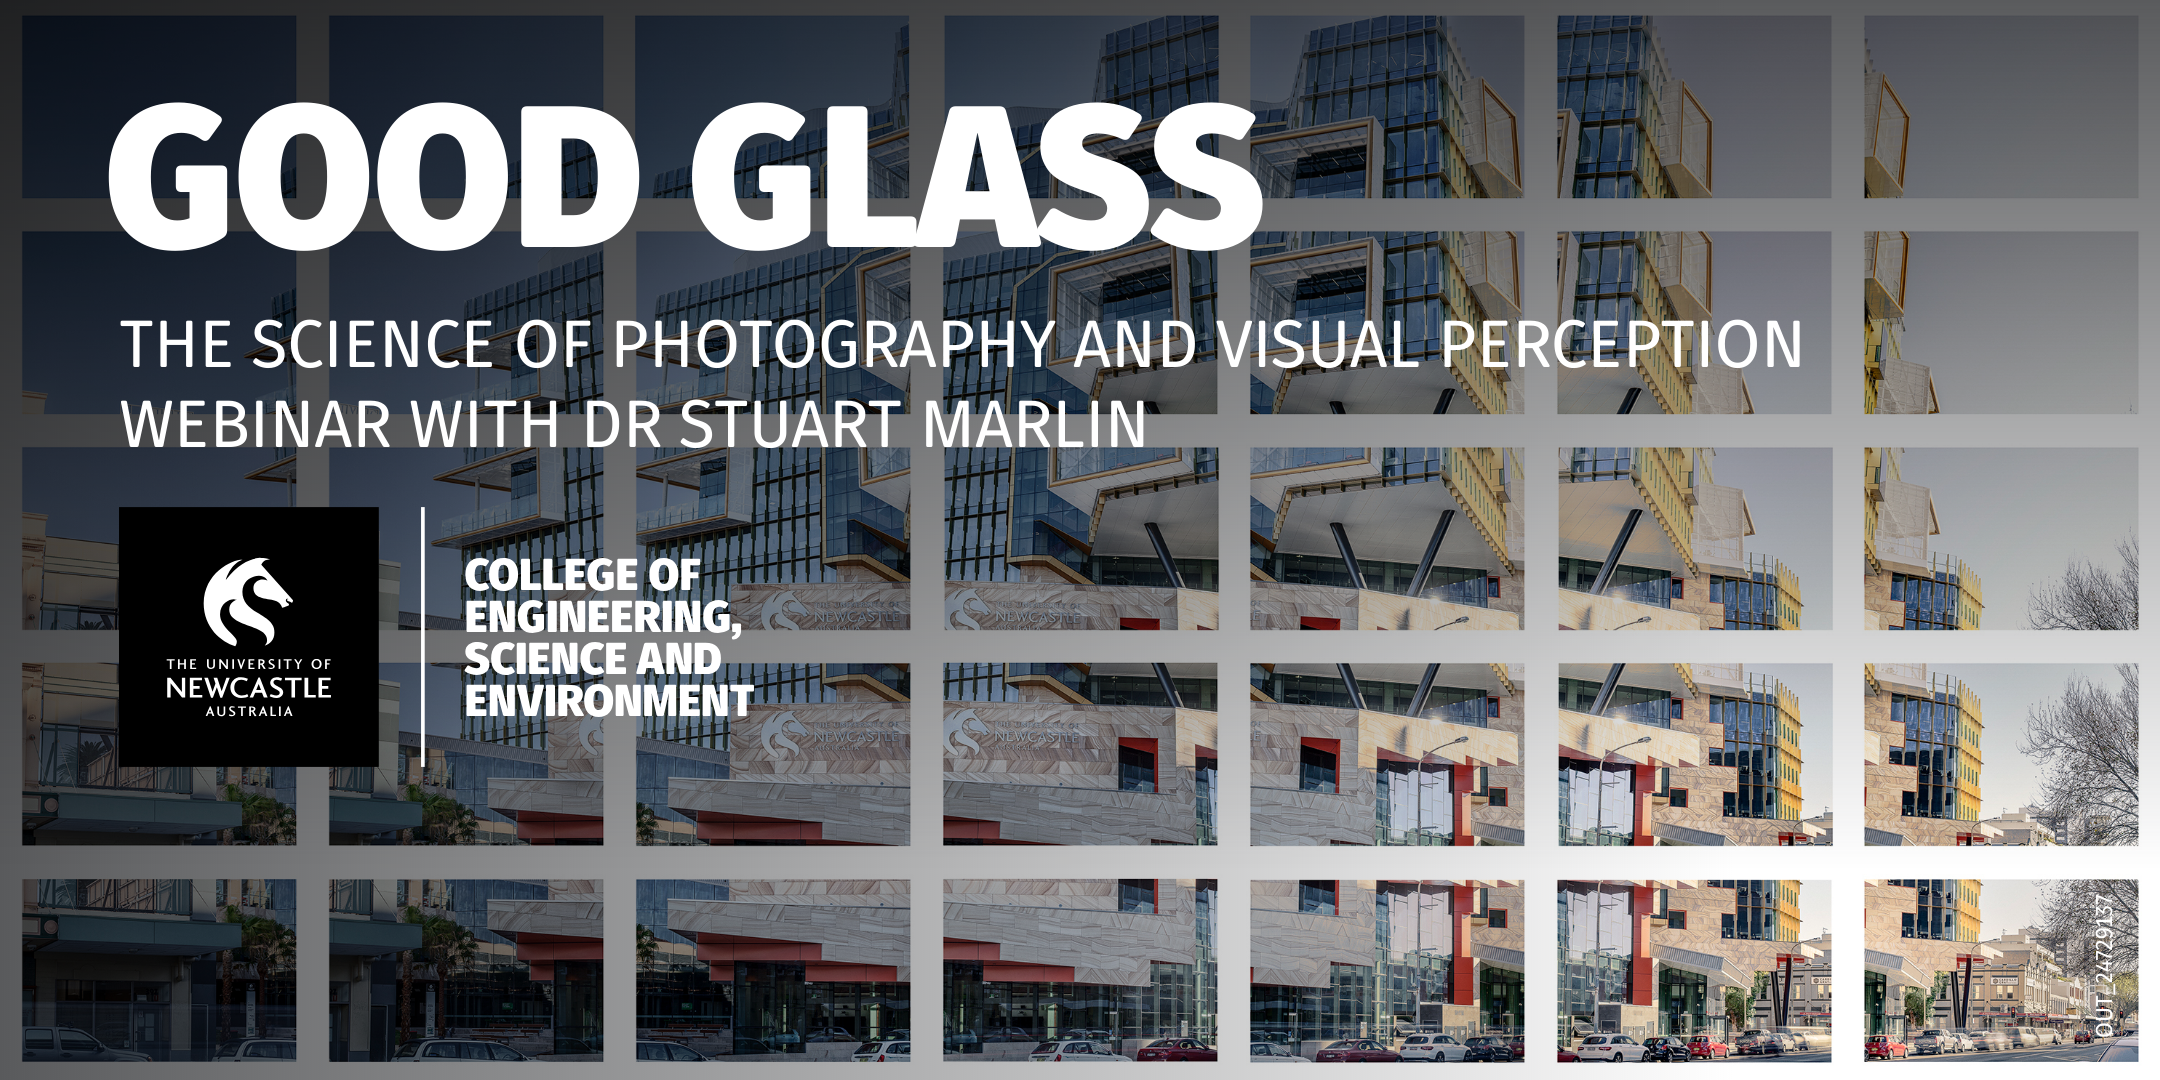 Good Glass: The science of photography and visual perception | Webinar